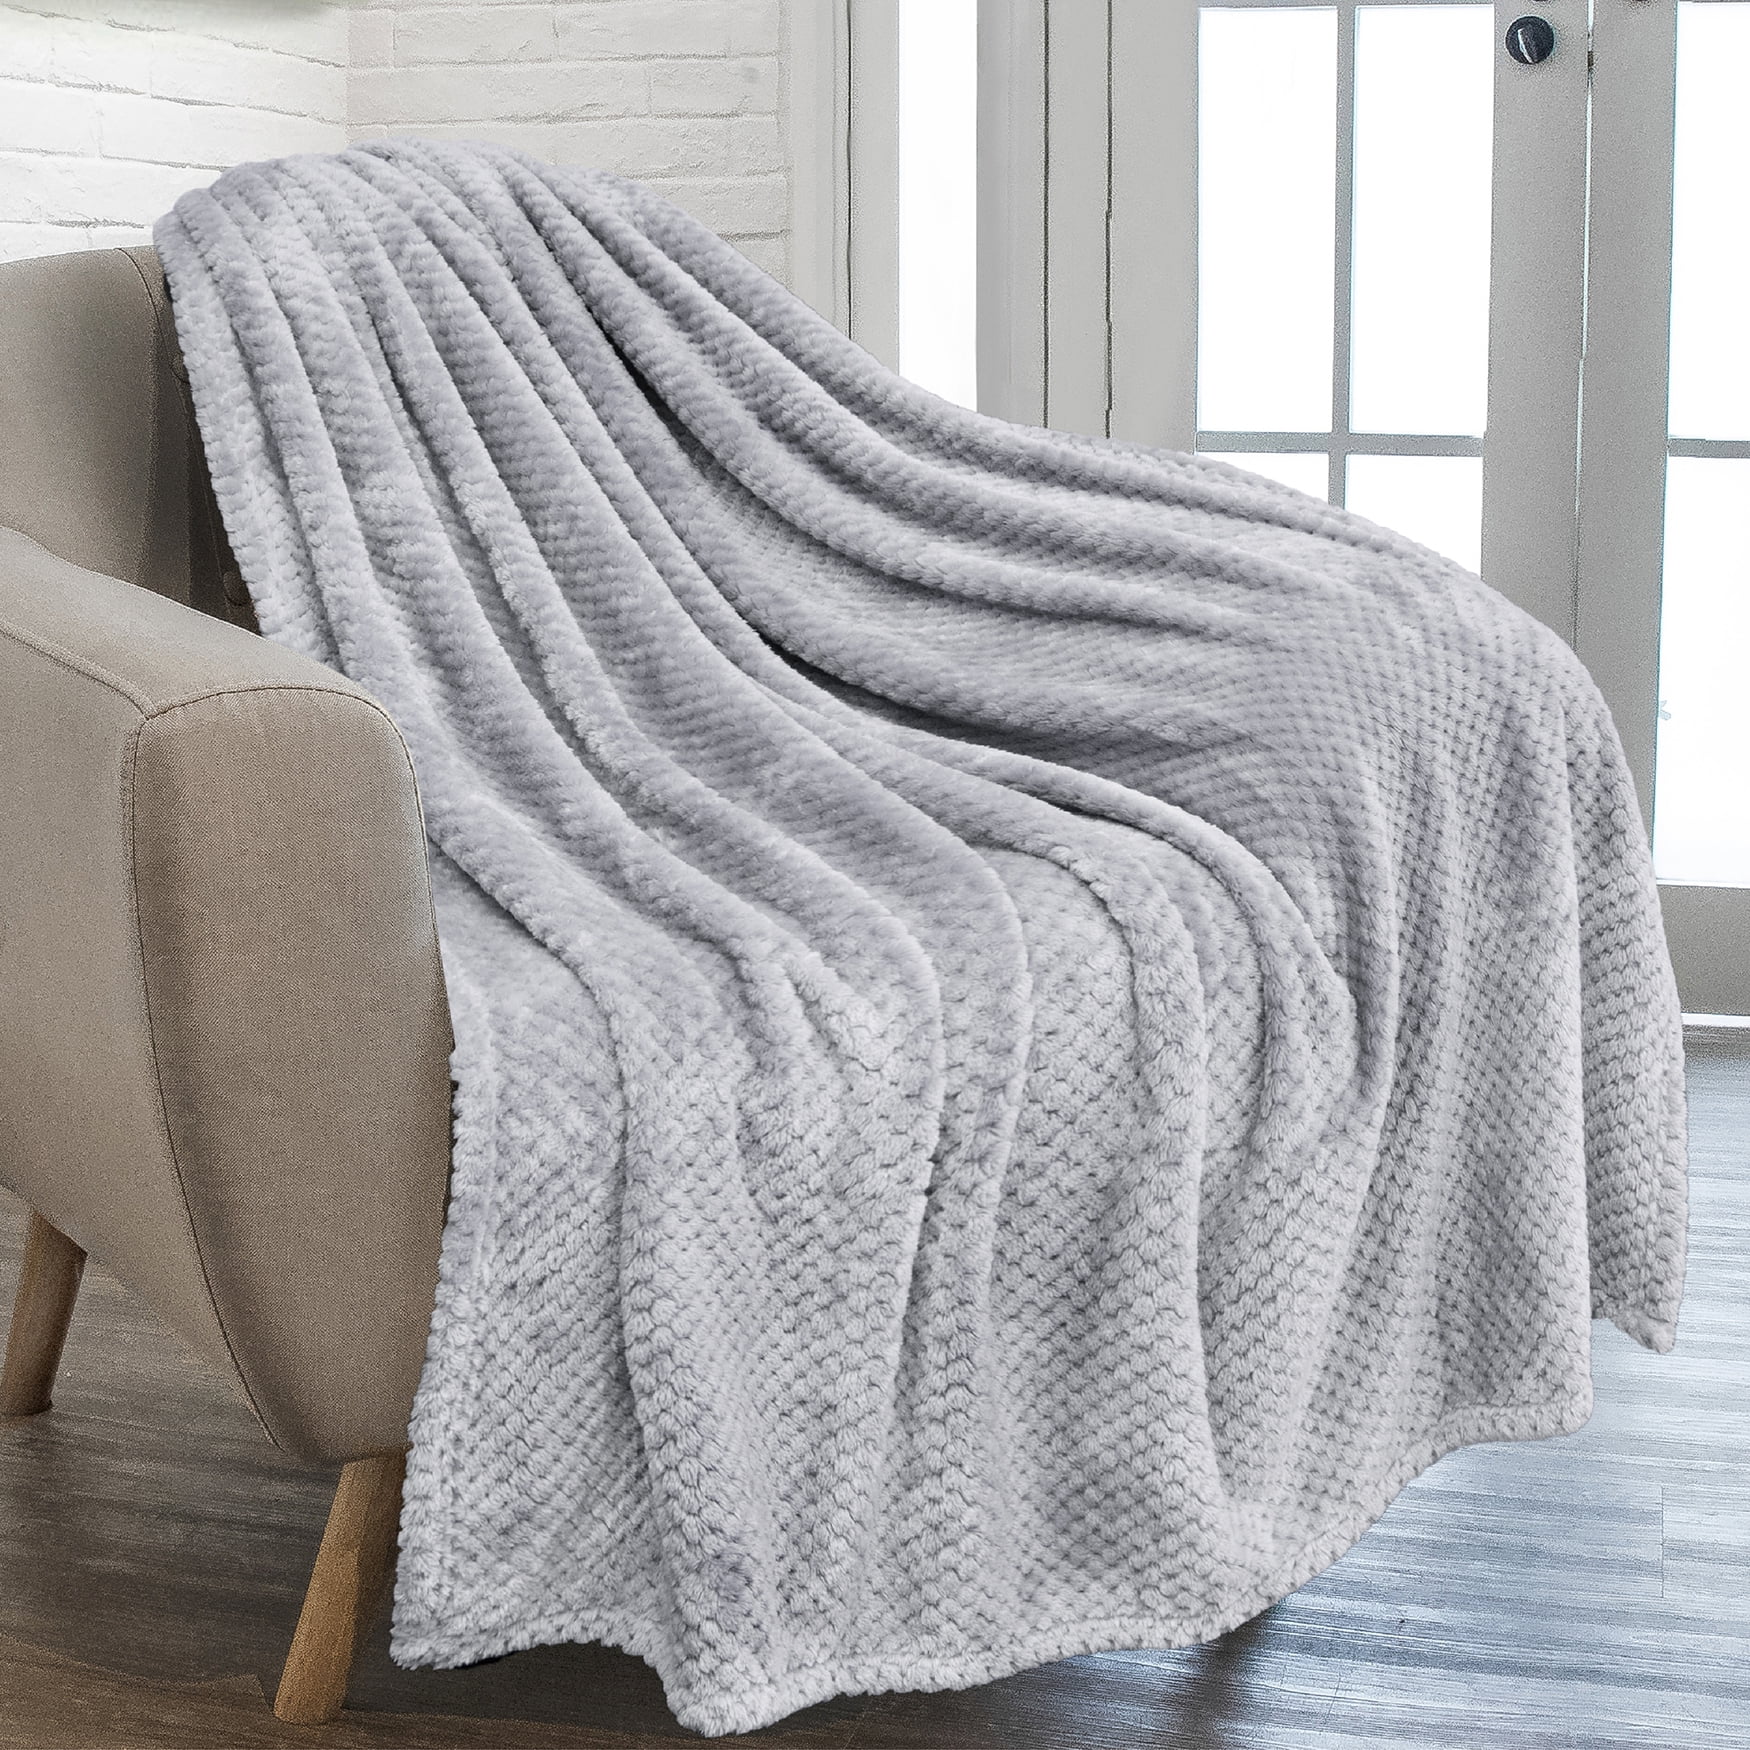 Gray,50 x 60 Wellbeing Fall Throw Blanket for Couch,Flannel Blankets & Throws,Soft Lightweight Grey Fuzzy Blanket for Bed,Sofa,Chair 